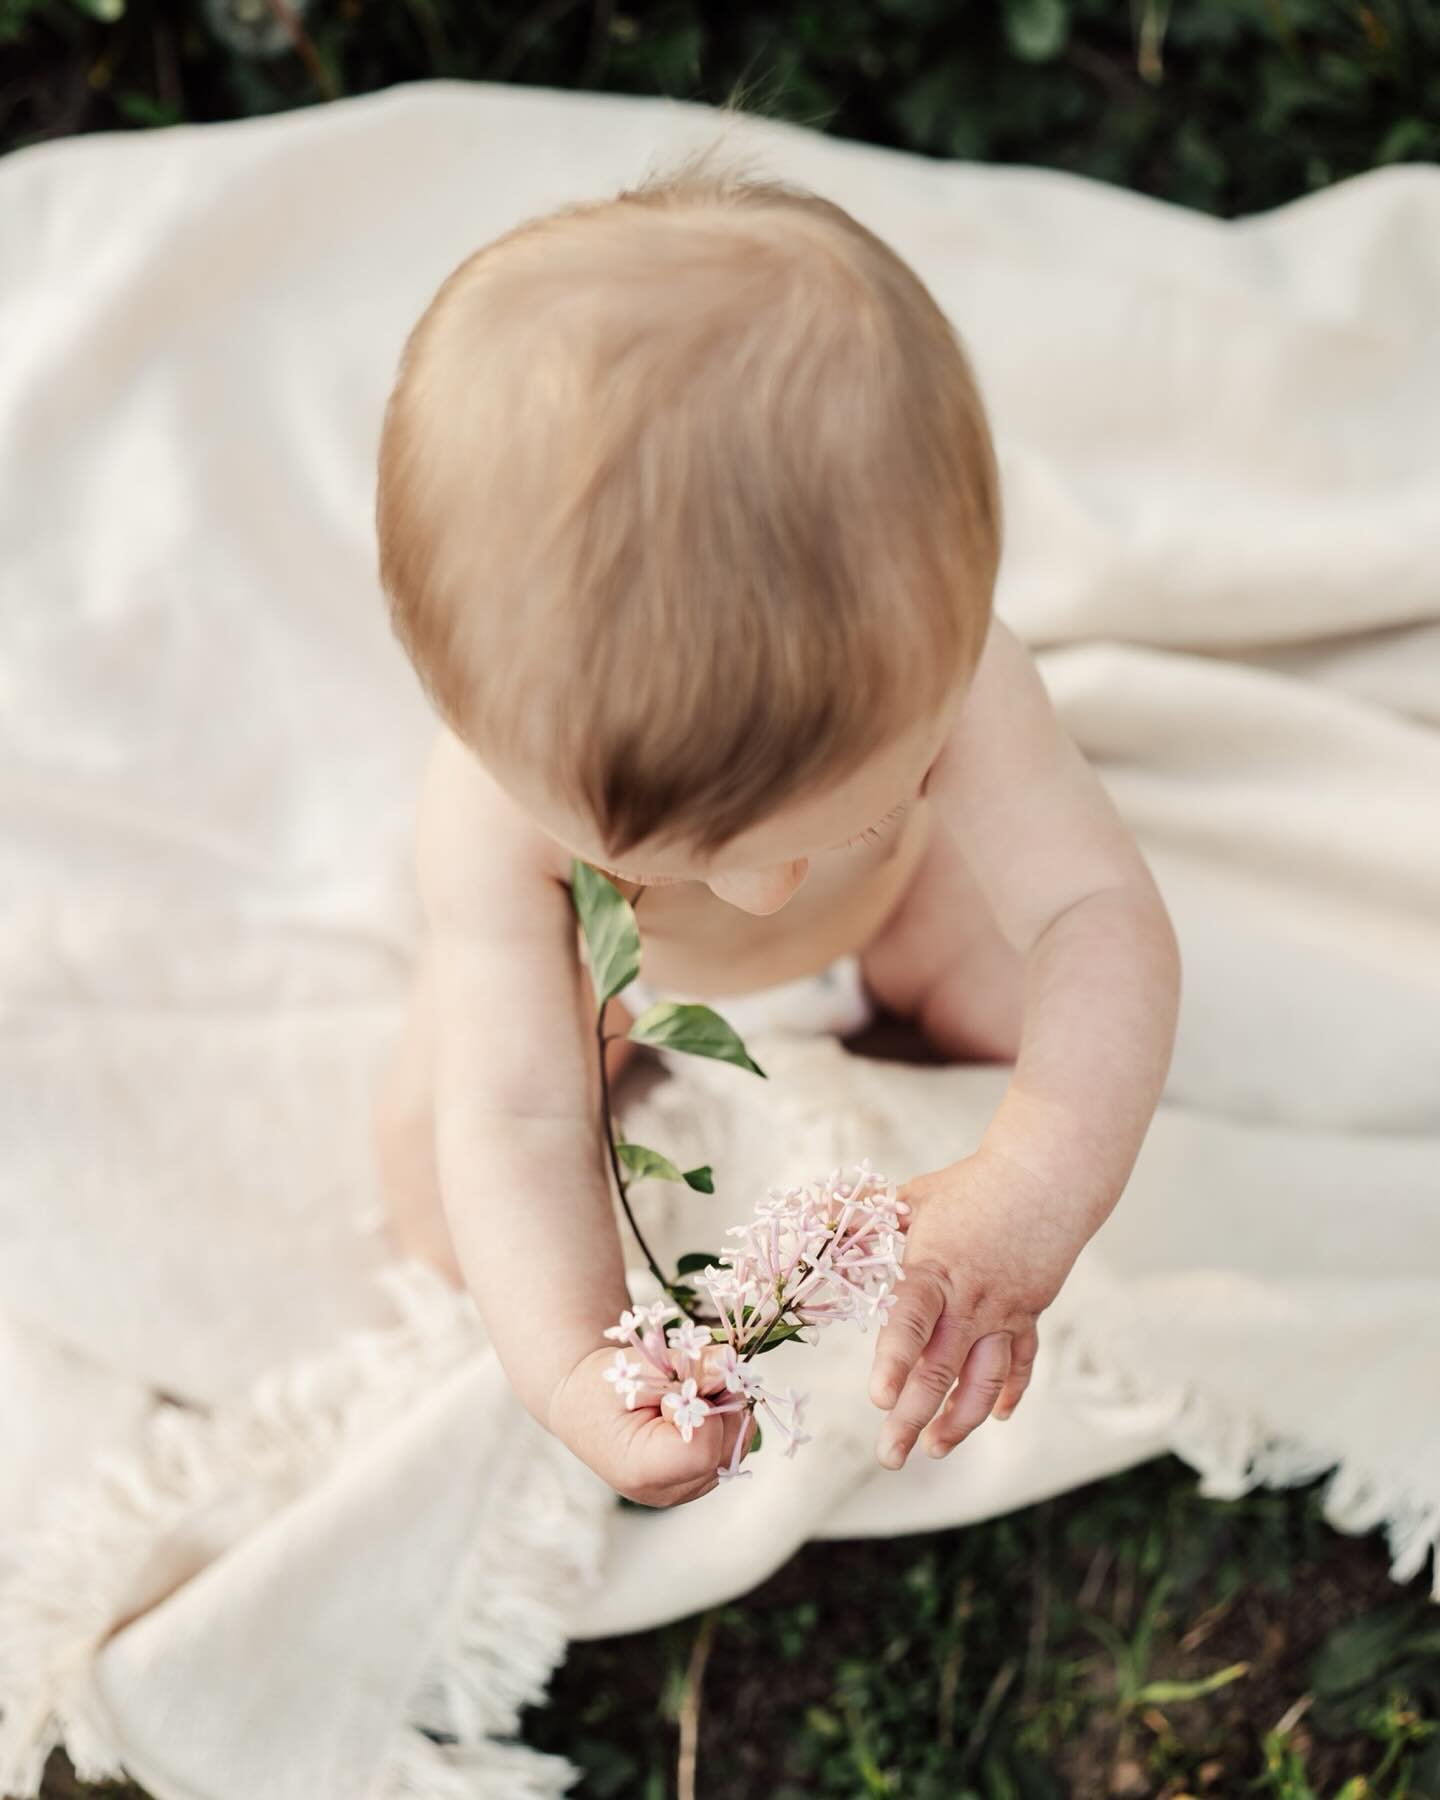 The lilacs are blooming! Please enjoy these sweet tiny baby fingers holding sweet tiny blossoms. 

We don&rsquo;t need epic backdrops or fancy outfits to document your family; all you really need is to show up. That showing up could even just be to y